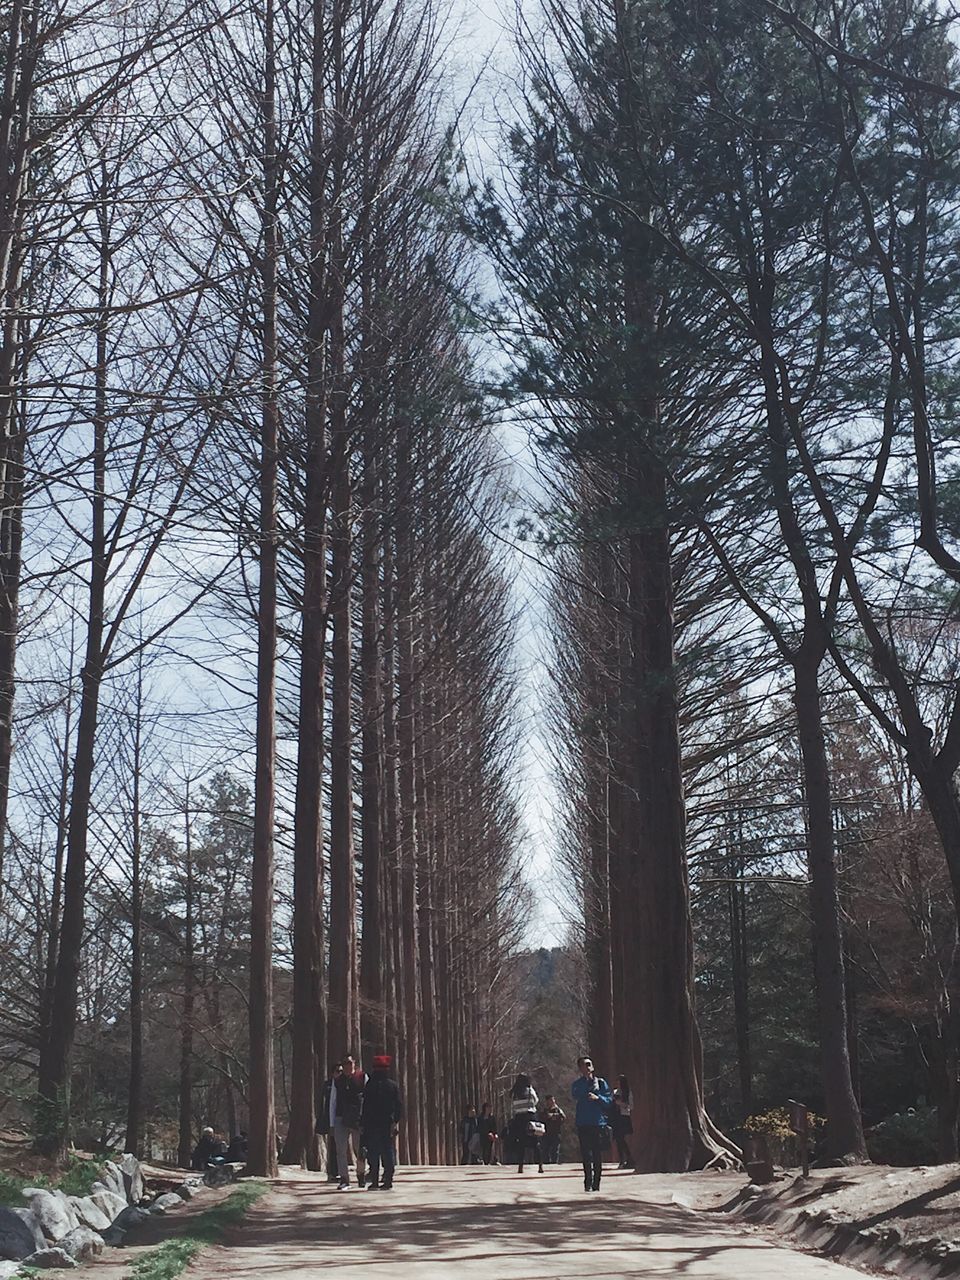 PEOPLE WALKING ON FOOTPATH AMIDST BARE TREES IN CITY